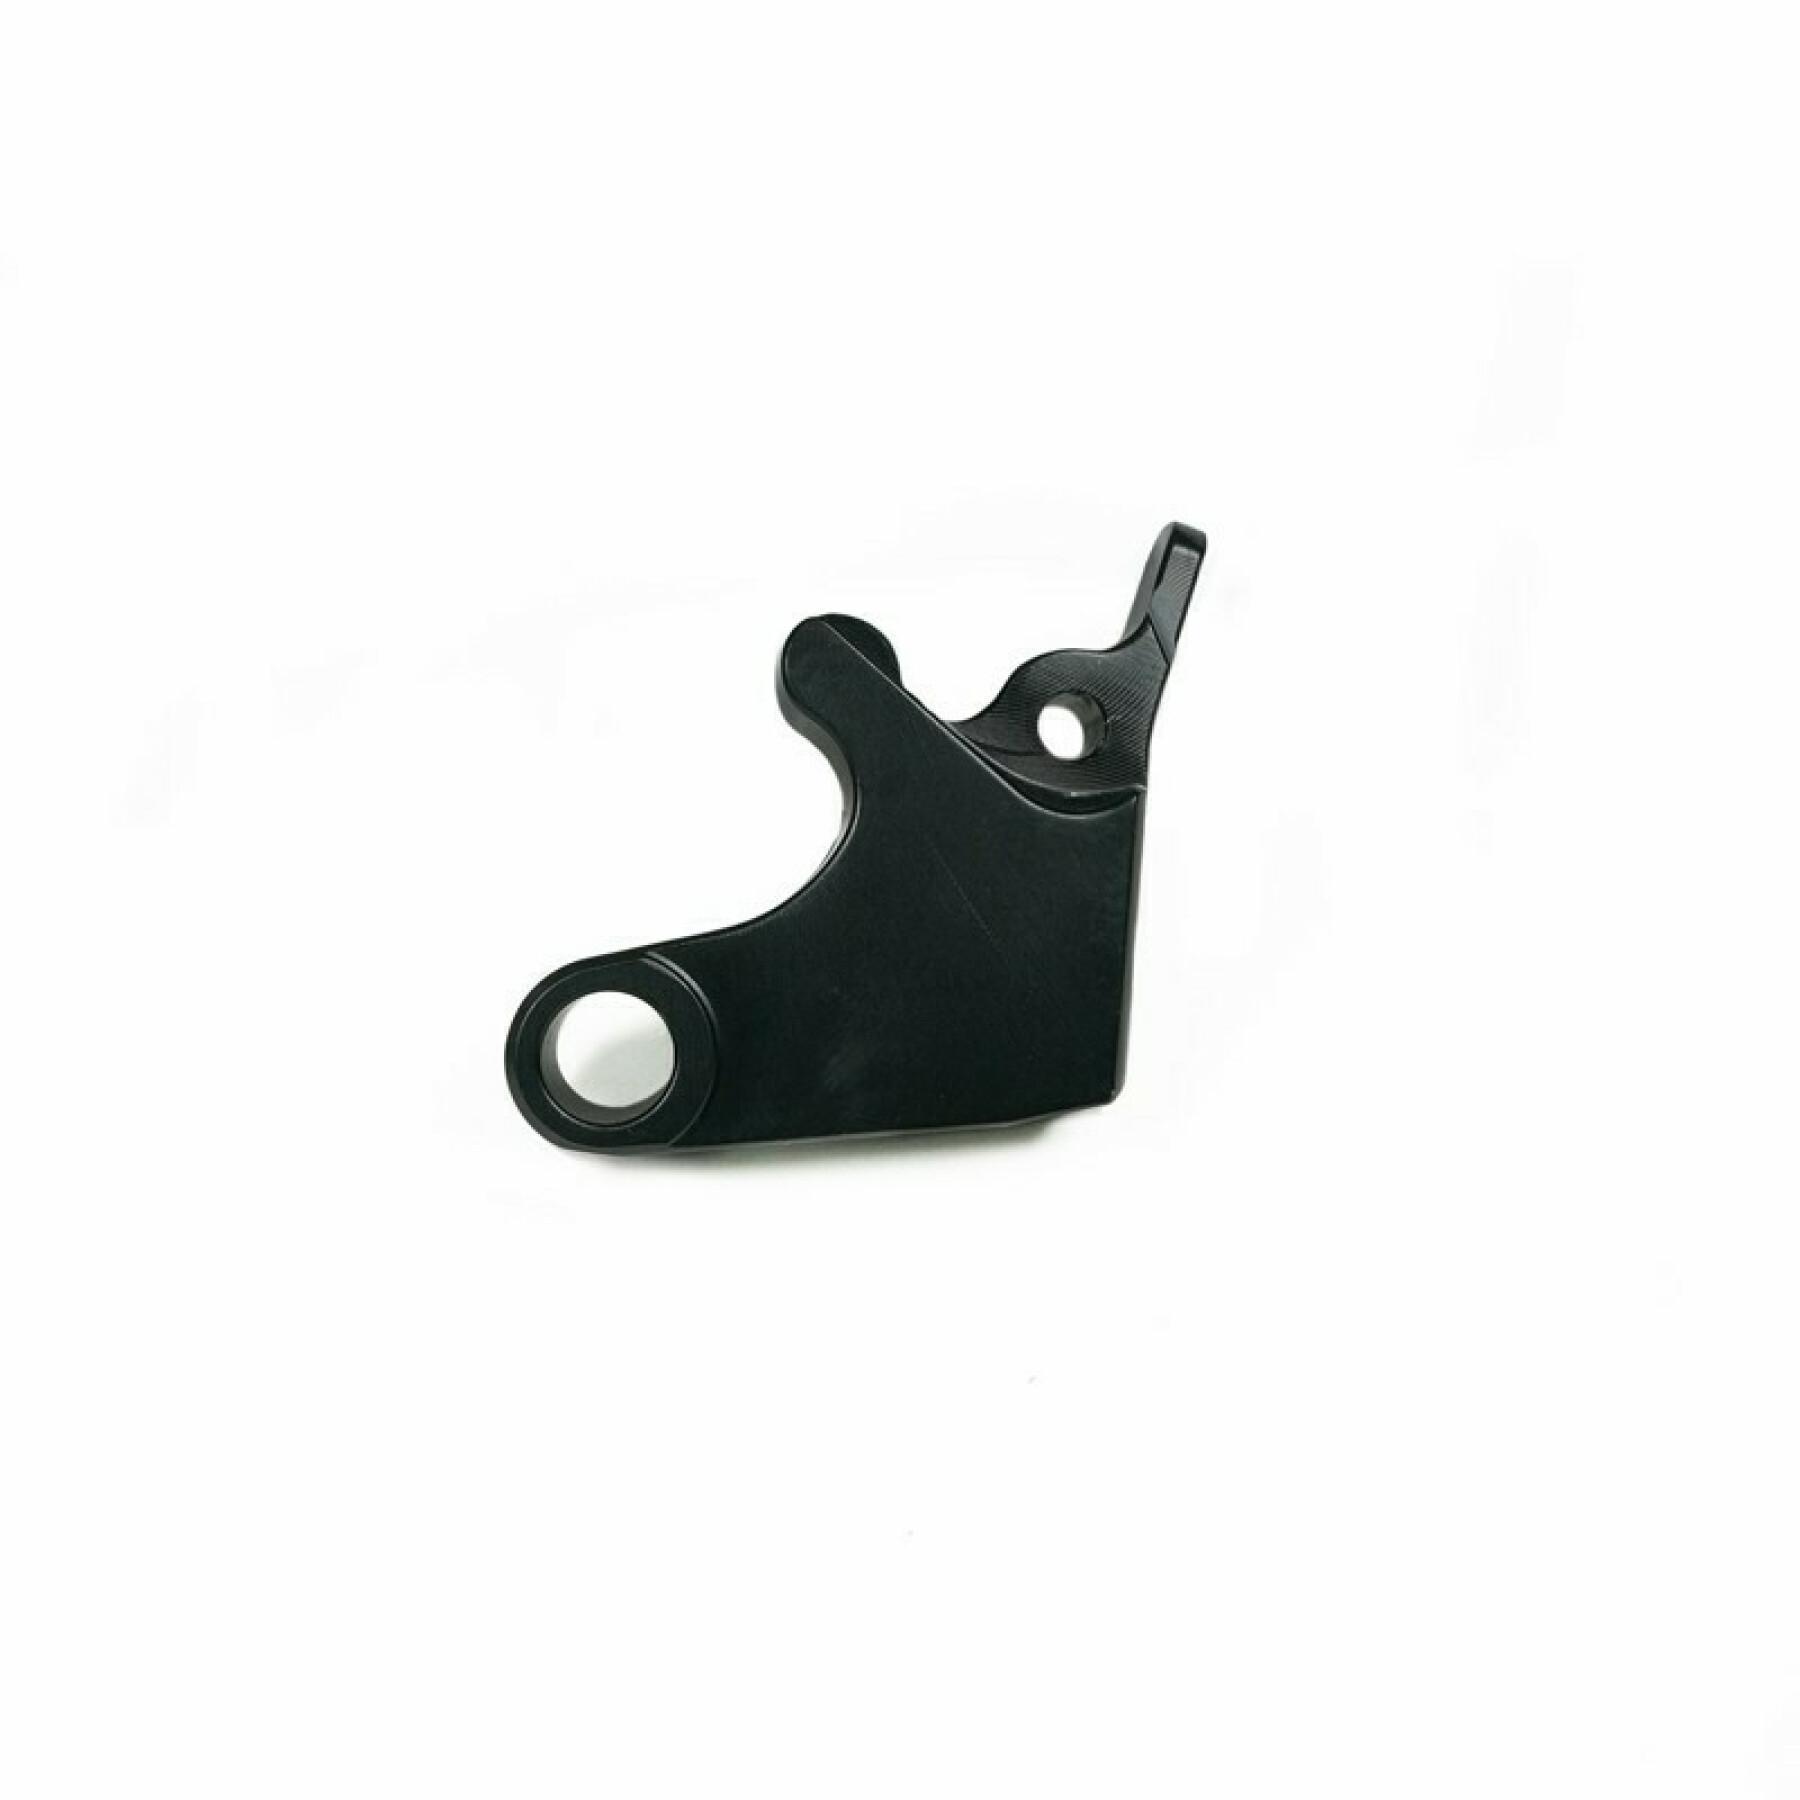 Clutch lever adapter 09 Chaft